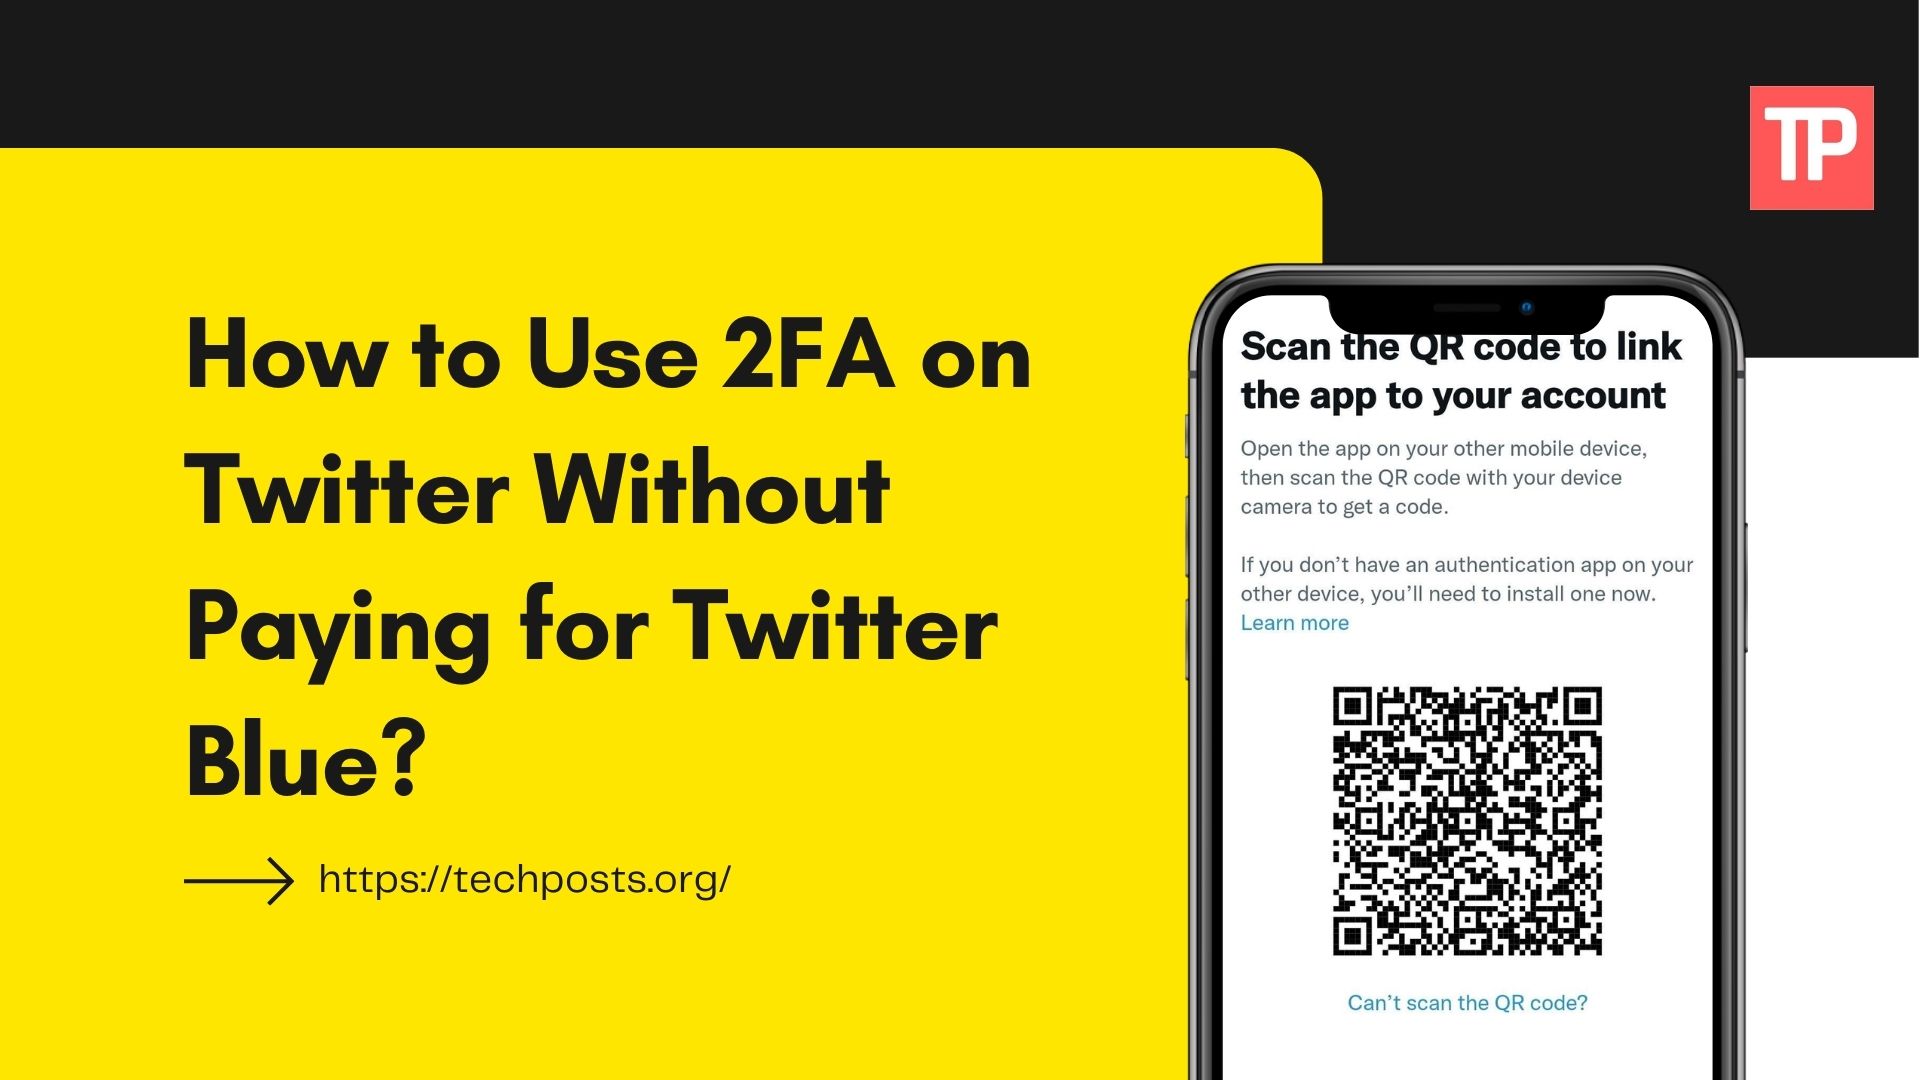 How to Use 2FA on Twitter Without Paying for Twitter Blue